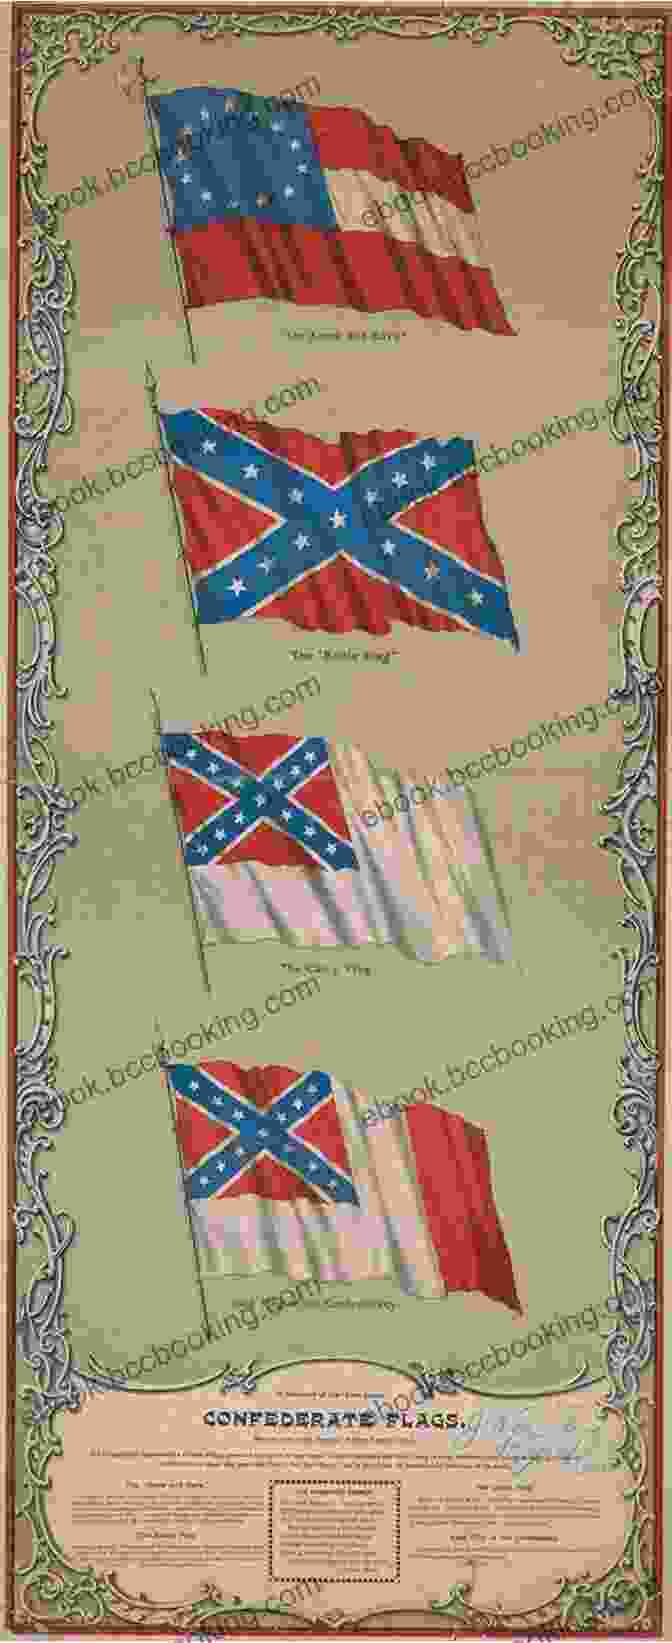 Confederate Flag Flying Over A Battlefield During The Civil War Mary Boykin Chesnut: A Confederate Woman S Life (American Profiles)